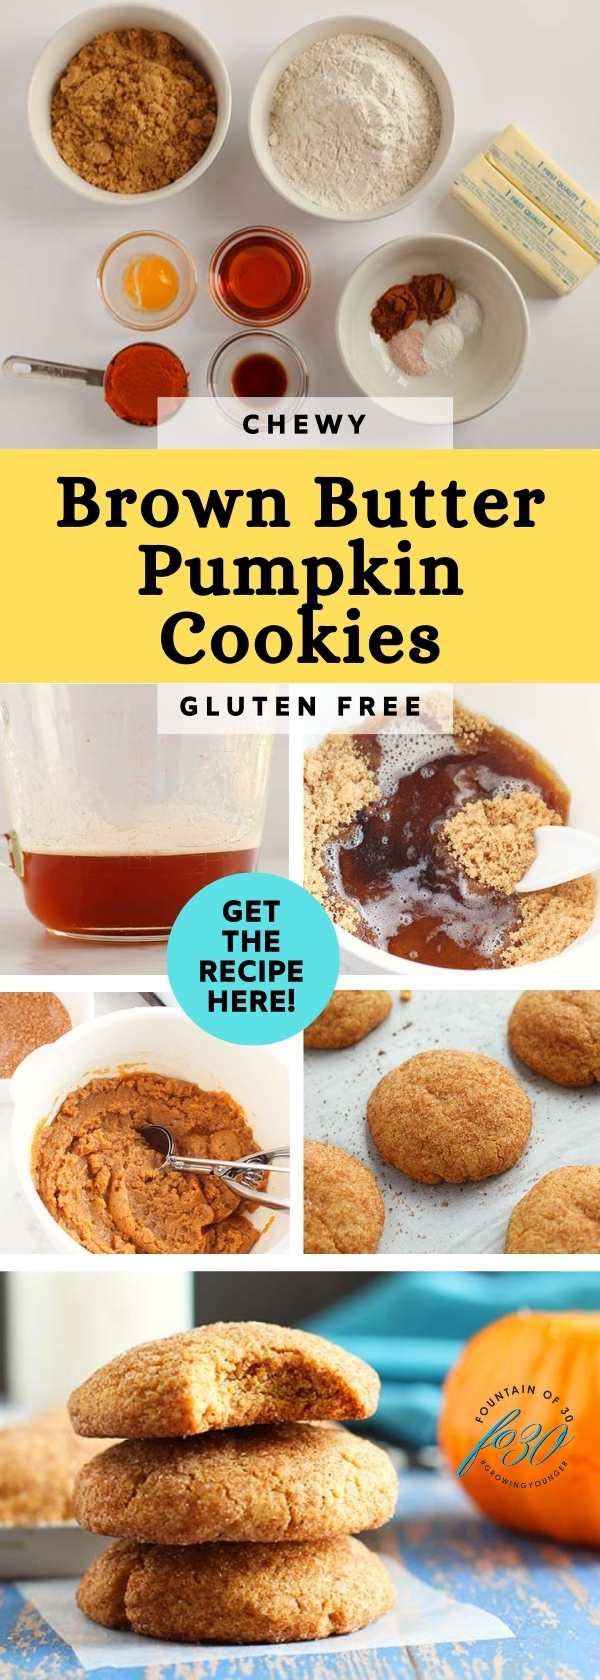 chewy sugar and spice coated brown butter pumpkin cookies fountainof30